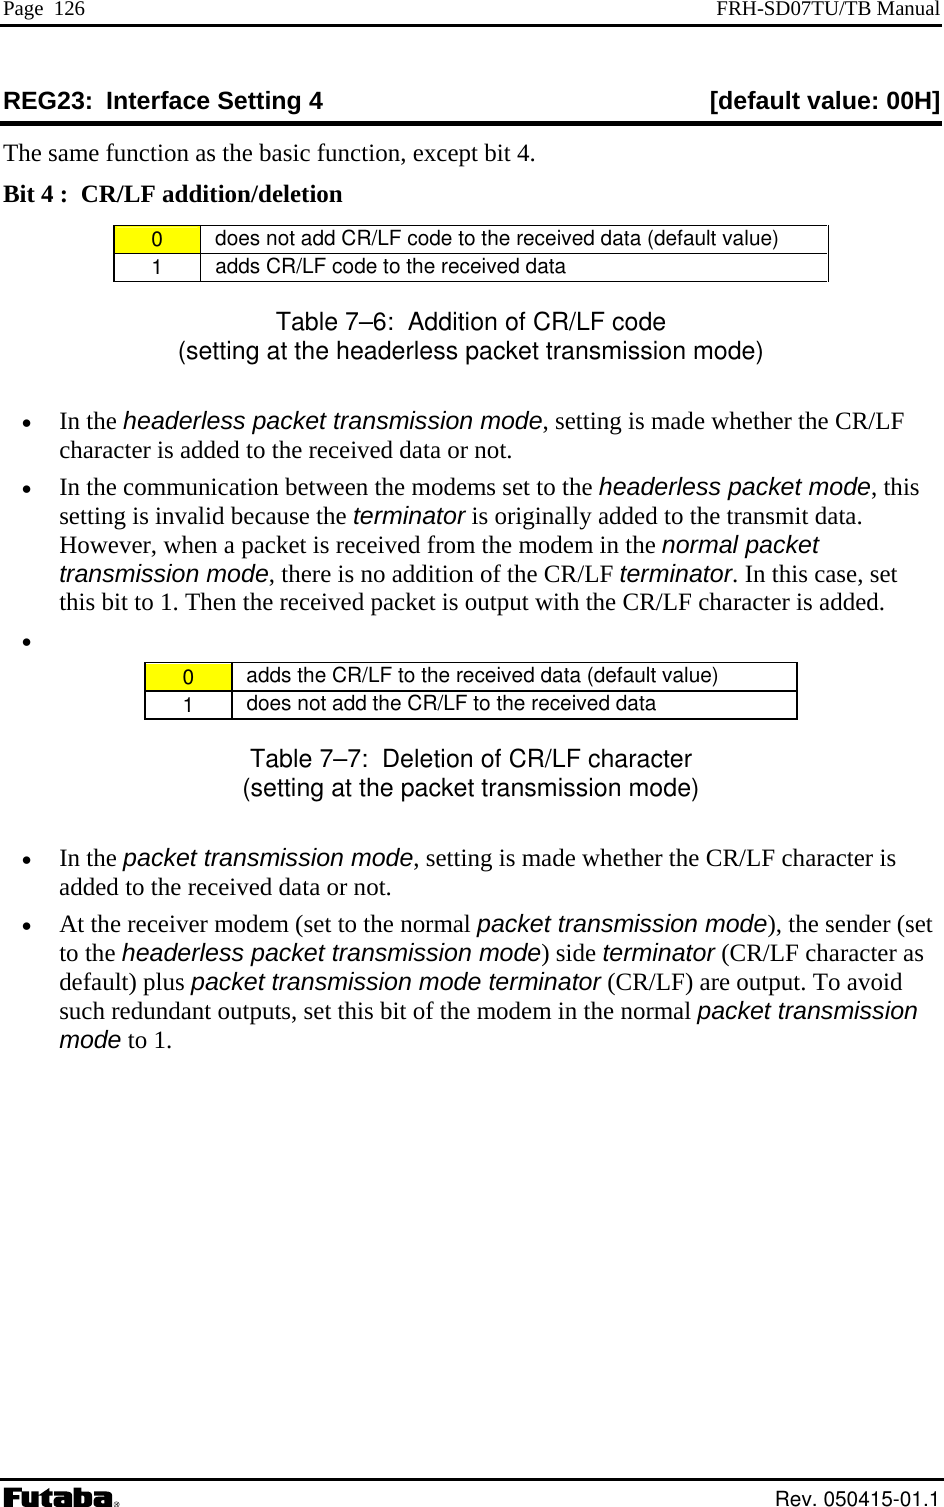 Page  126  FRH-SD07TU/TB Manual REG23:  Interface Setting 4  [default value: 00H] The same function as the basic function, except bit 4. Bit 4 :  CR/LF addition/deletion 0   does not add CR/LF code to the received data (default value) 1   adds CR/LF code to the received data Table 7–6:  Addition of CR/LF code  (setting at the headerless packet transmission mode) •  In the headerless packet transmission mode, setting is made whether the CR/LF character is added to the received data or not.  •  In the communication between the modems set to the headerless packet mode, this setting is invalid because the terminator is originally added to the transmit data.   the modem in the normal packdition of the CR/LF terminato  added. However, when a packet is received from et transmission mode, there is no ad r. In this case, set this bit to 1. Then the received packet is output with the CR/LF character is•   0   adds the CR/LF to the received data (default value) 1   does not add the CR/LF to the received data Table 7–7:  Deletion of CR/LF character (setting at the packet transmission mode) mode, setting is made whether the C mode) side terminator (CR/LF character as minator (CR/LF) are output. To avoid such redundant outputs, set this bit of the modem in the normal packet transmission •  In the packet transmission  R/LF character is added to the received data or not. •  At the receiver modem (set to the normal packet transmission mode), the sender (set to the headerless packet transmissiondefault) plus packet transmission mode termode to 1.  Rev. 050415-01.1 